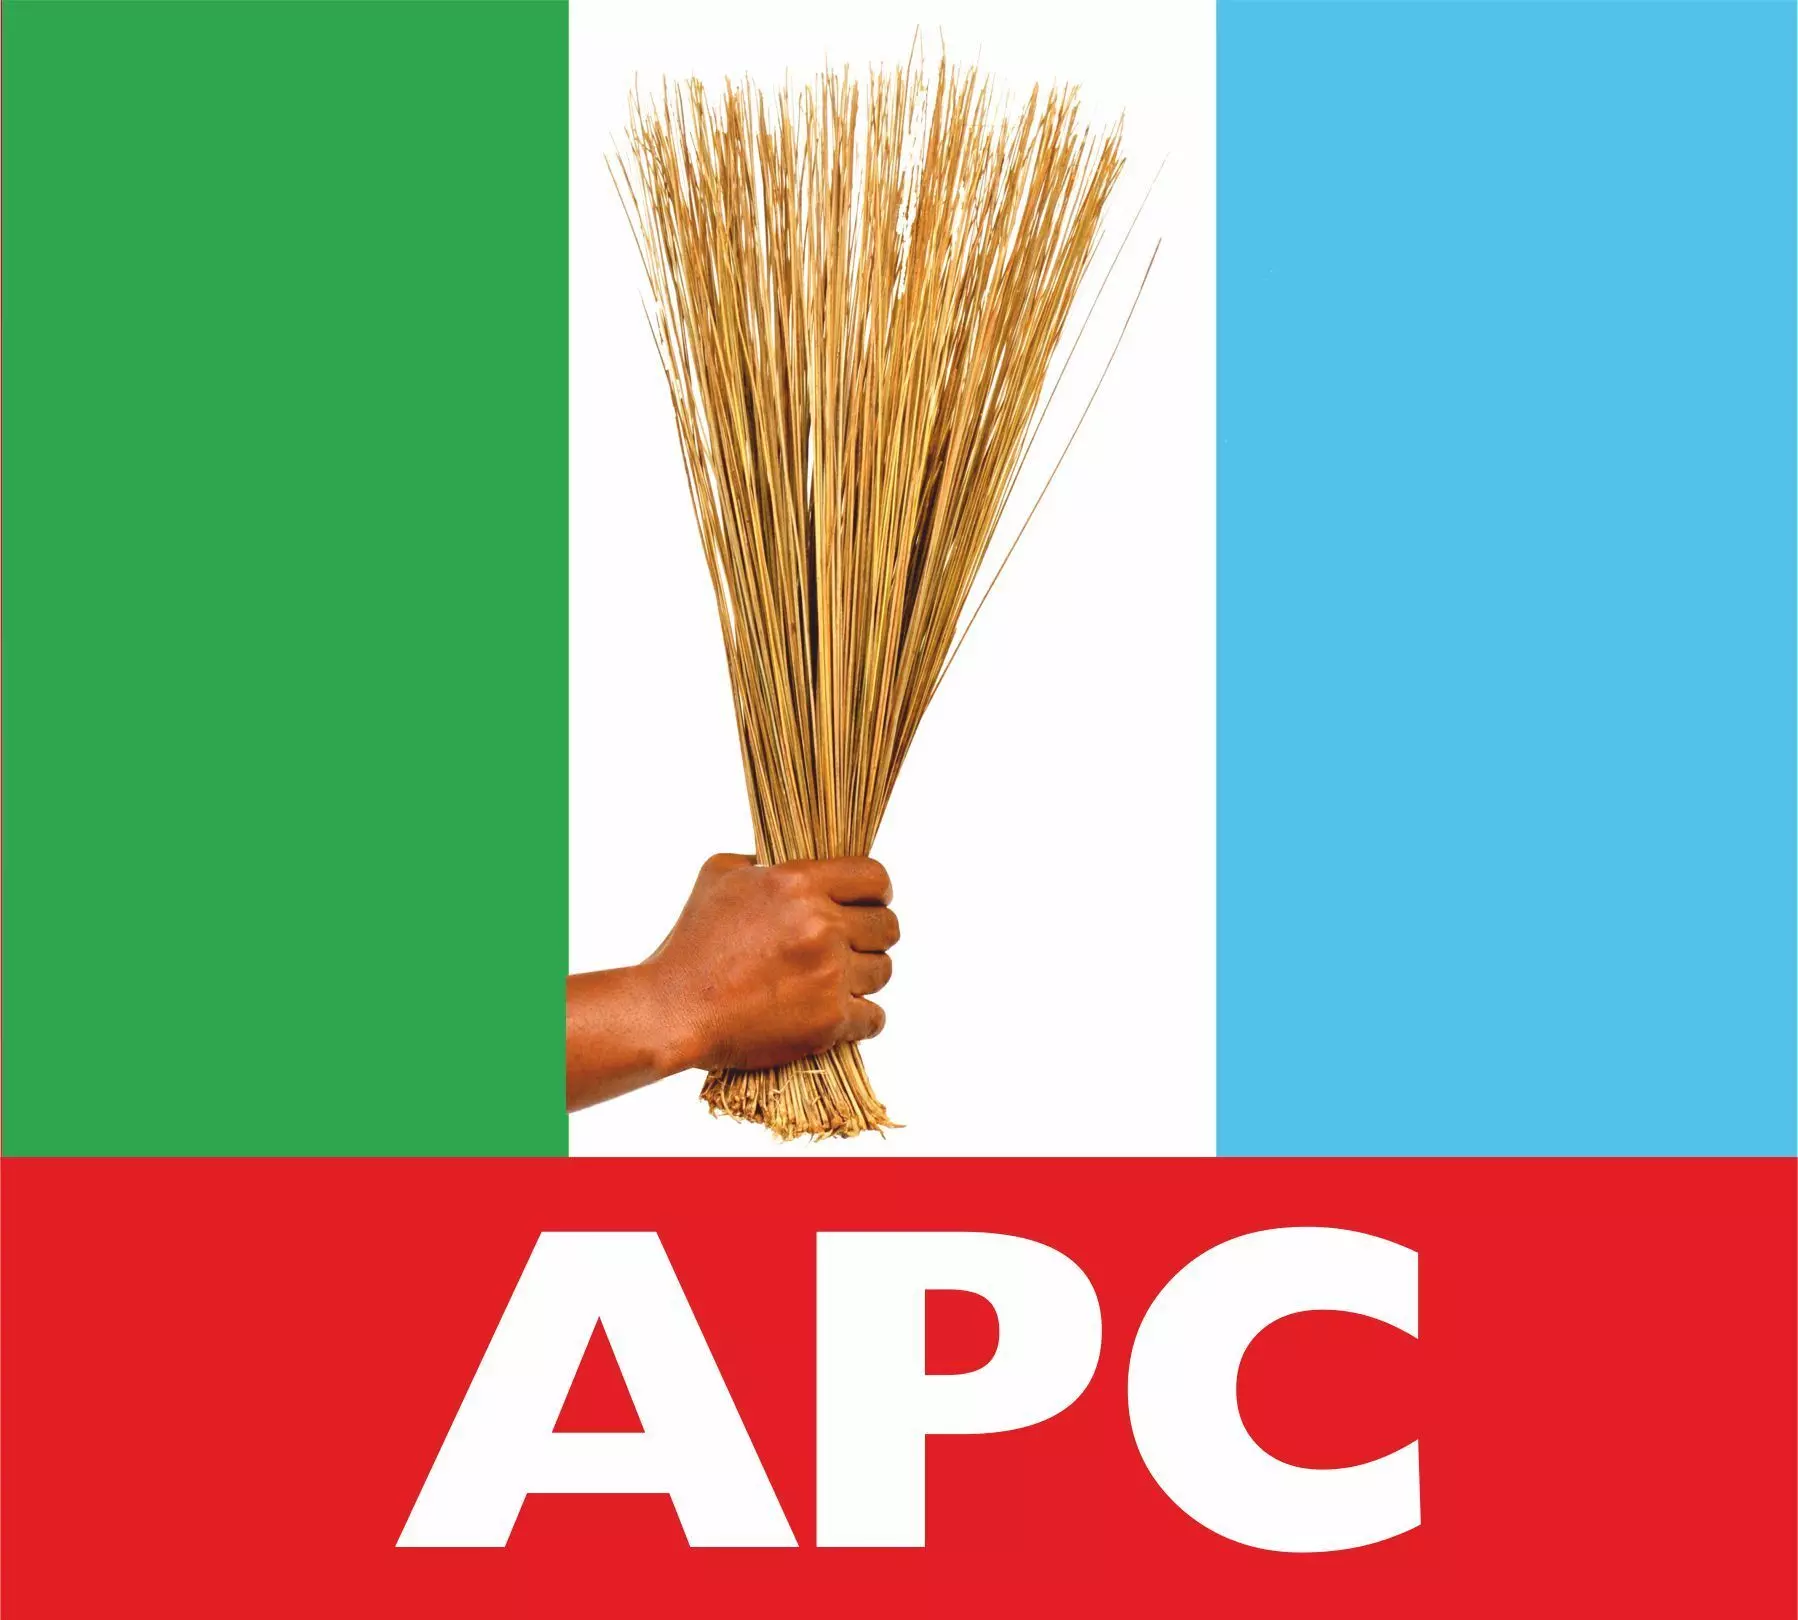 We’ll resolve our differences soon, APC assures stakeholders